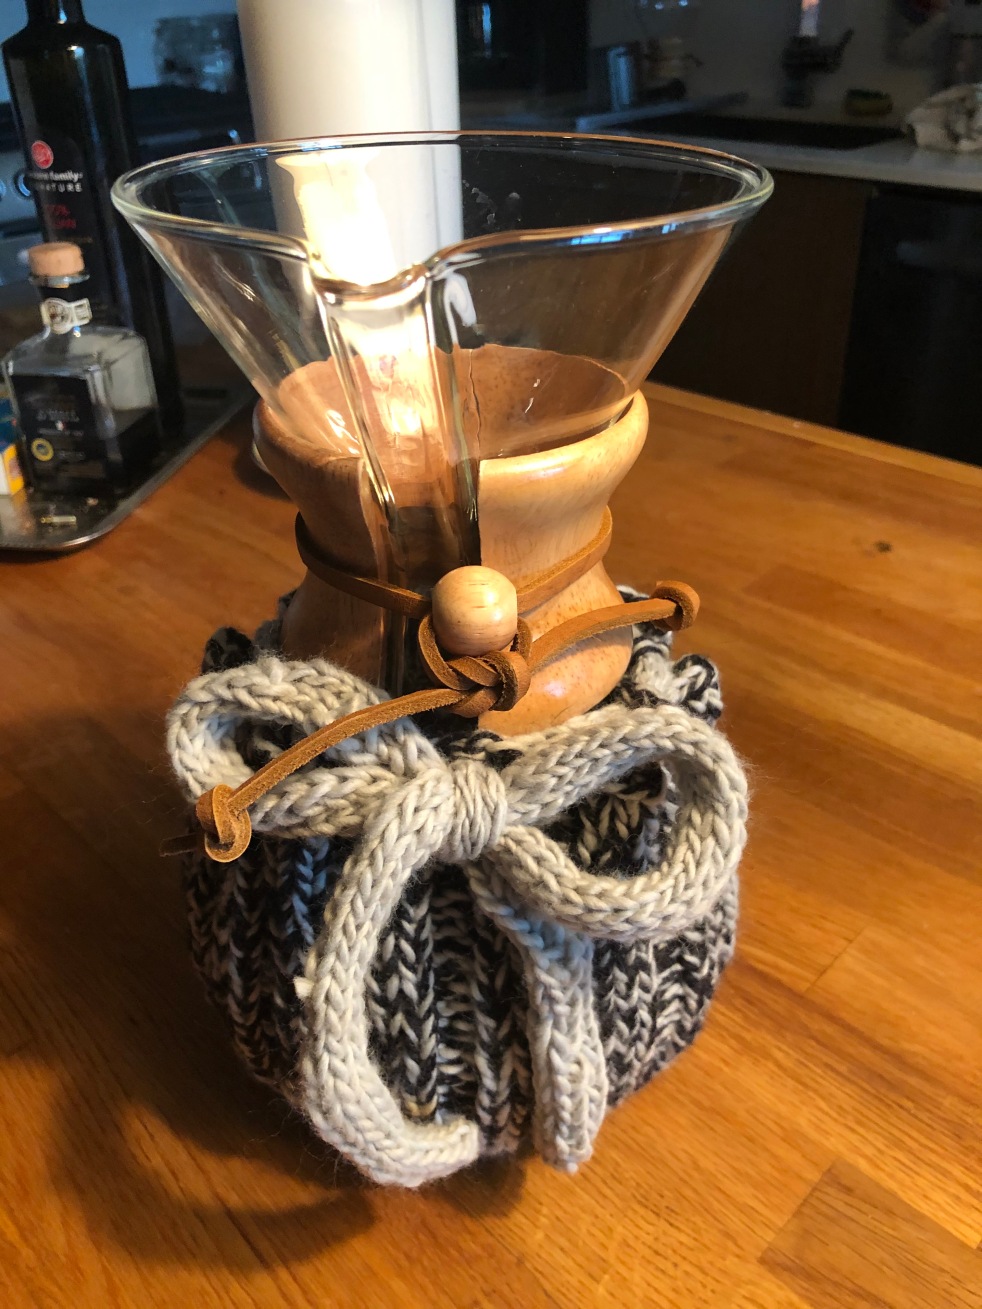 Chemex cozy knitting pattern – The Write Cup